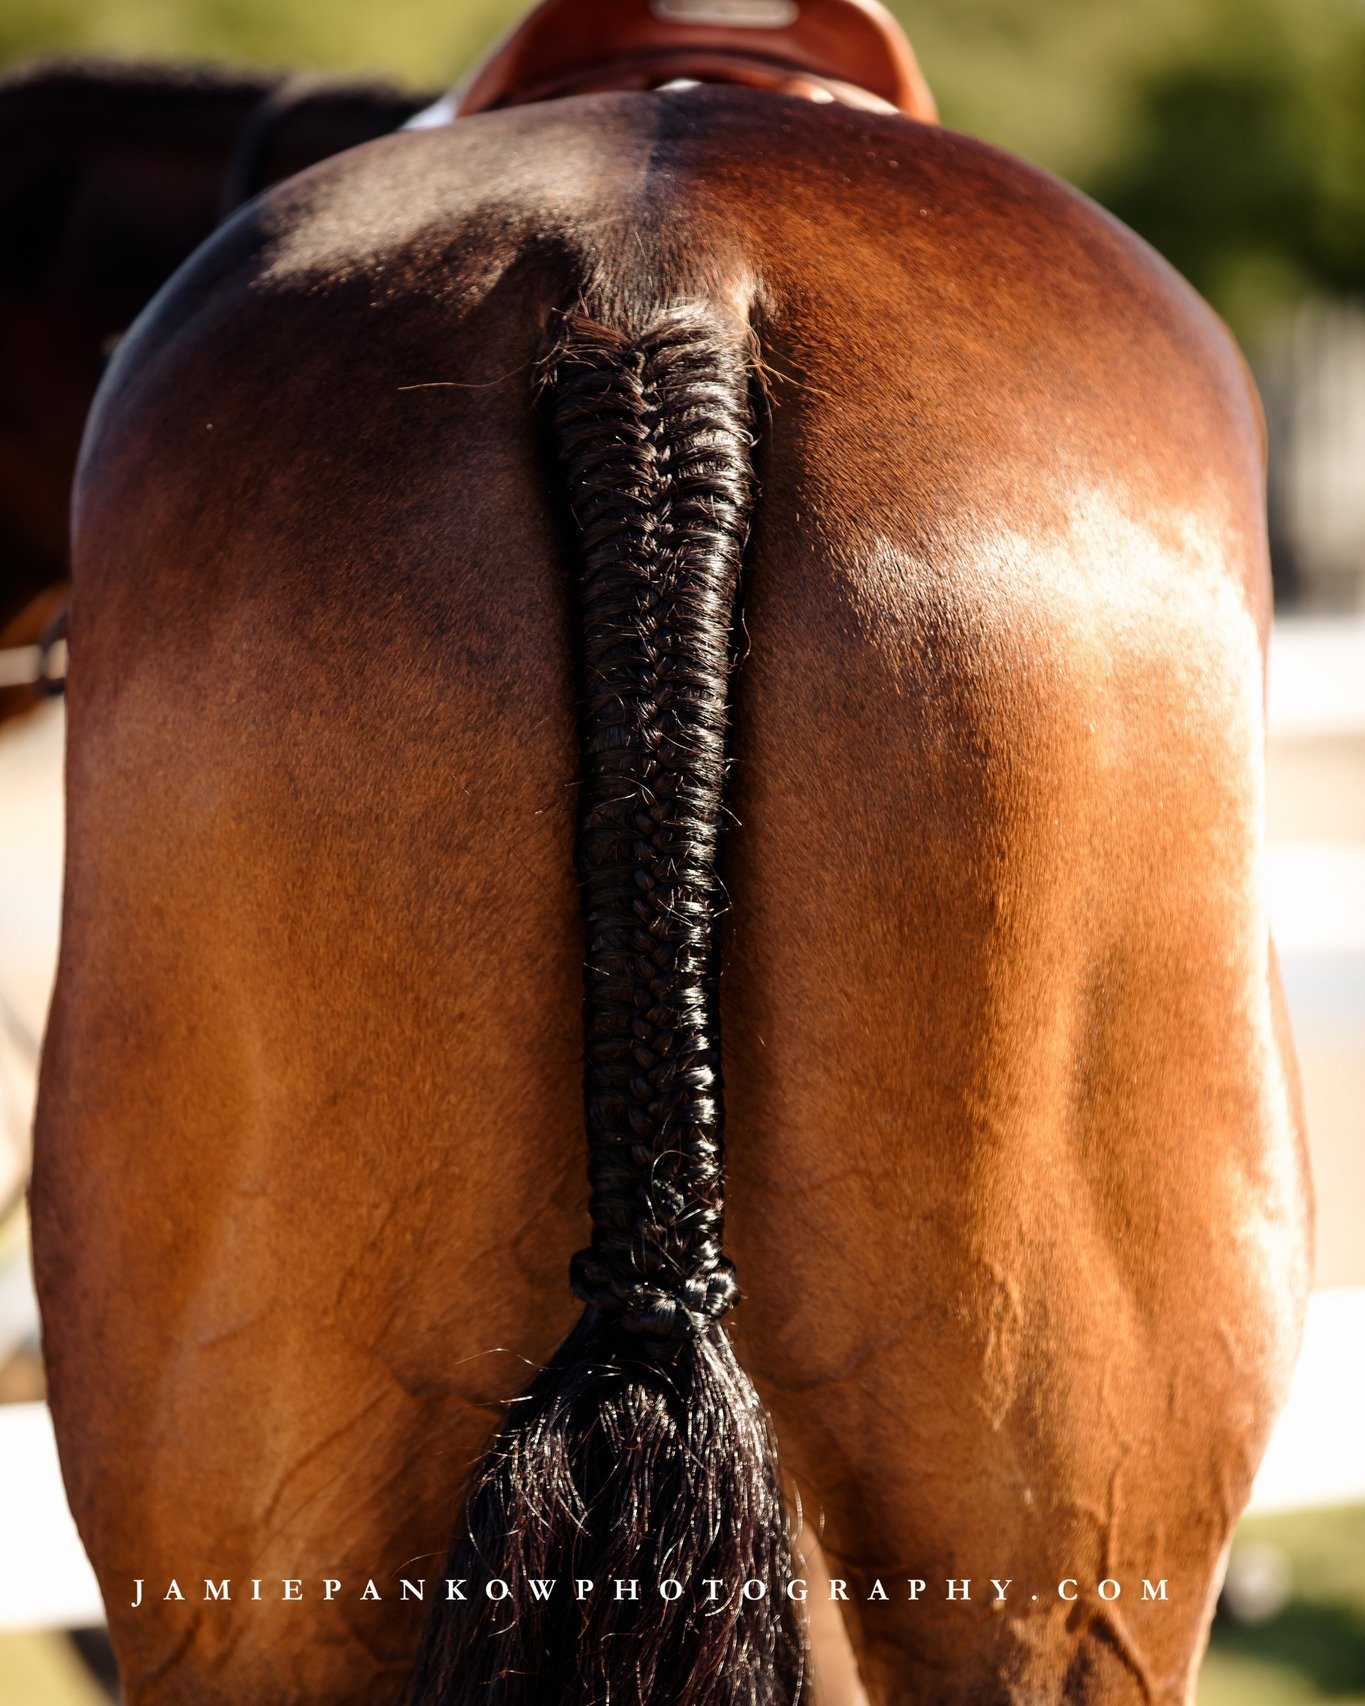 When it comes to braiding tails, are you doing it or do you prefer to have someone else?
.
.
.
#WesternNewYorkPhotographer #RochesterNY #SeniorPhotographer #PortraitPhotographer #BuffaloPhotographer #DoWhatYouLove #JamiePankowPhotography #TeamCanon #